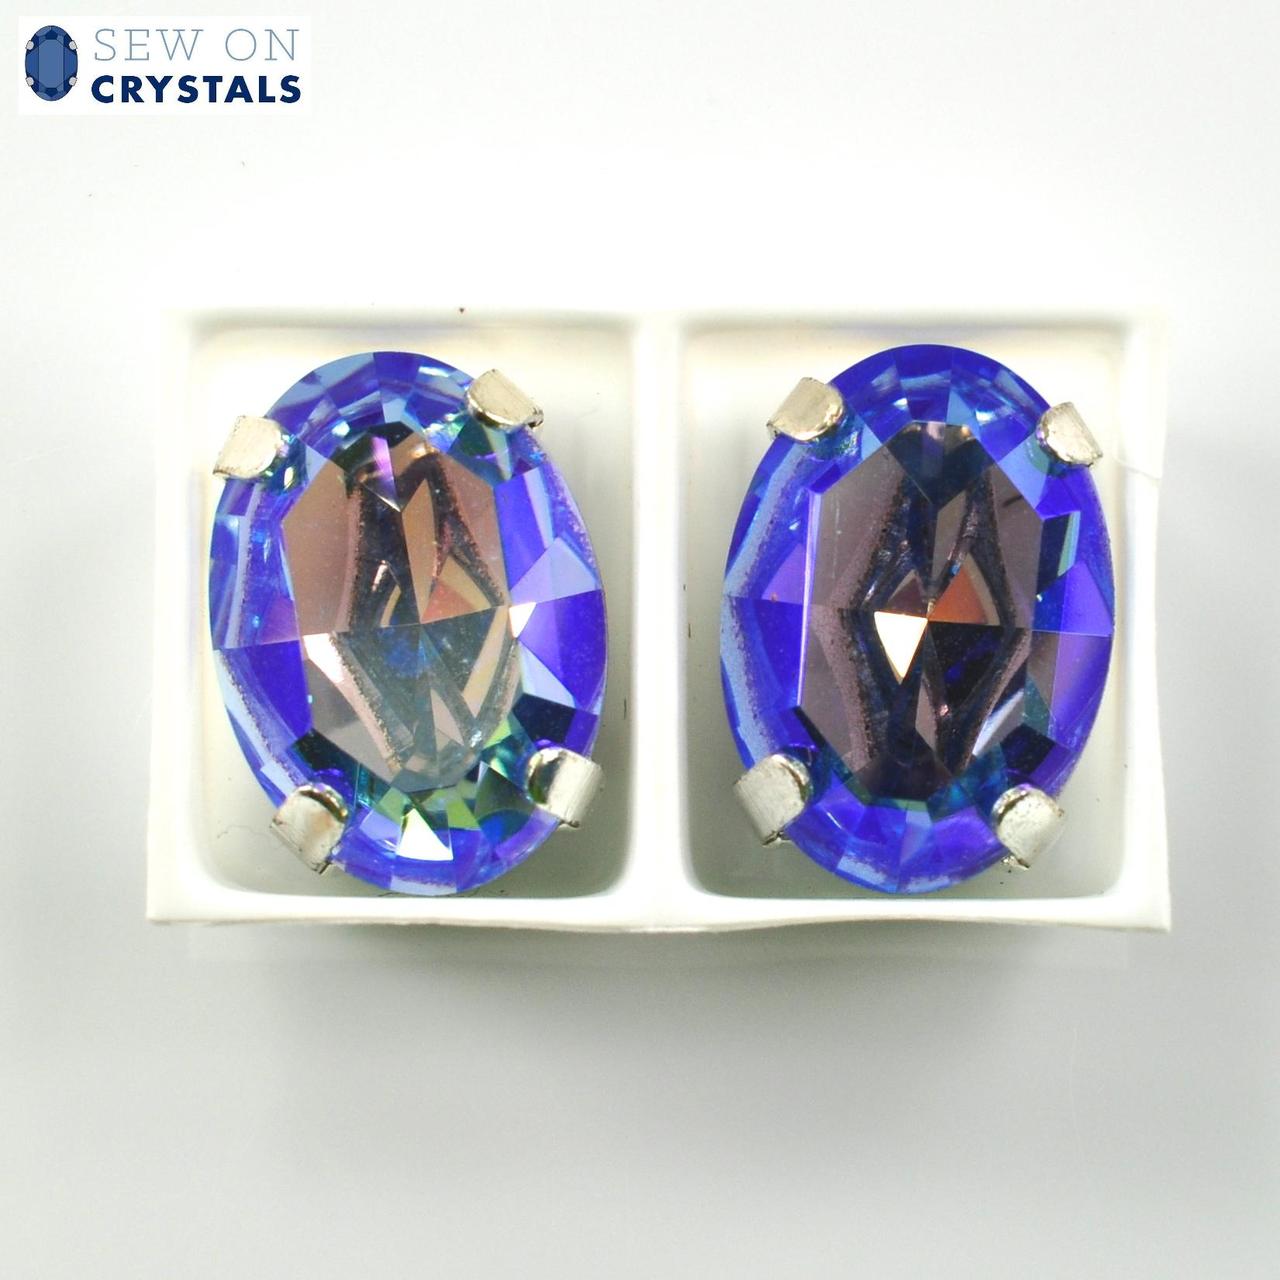 Light Sapphire Glacier Blue 14x10mm Oval Sew On Crystals - 2 Pieces